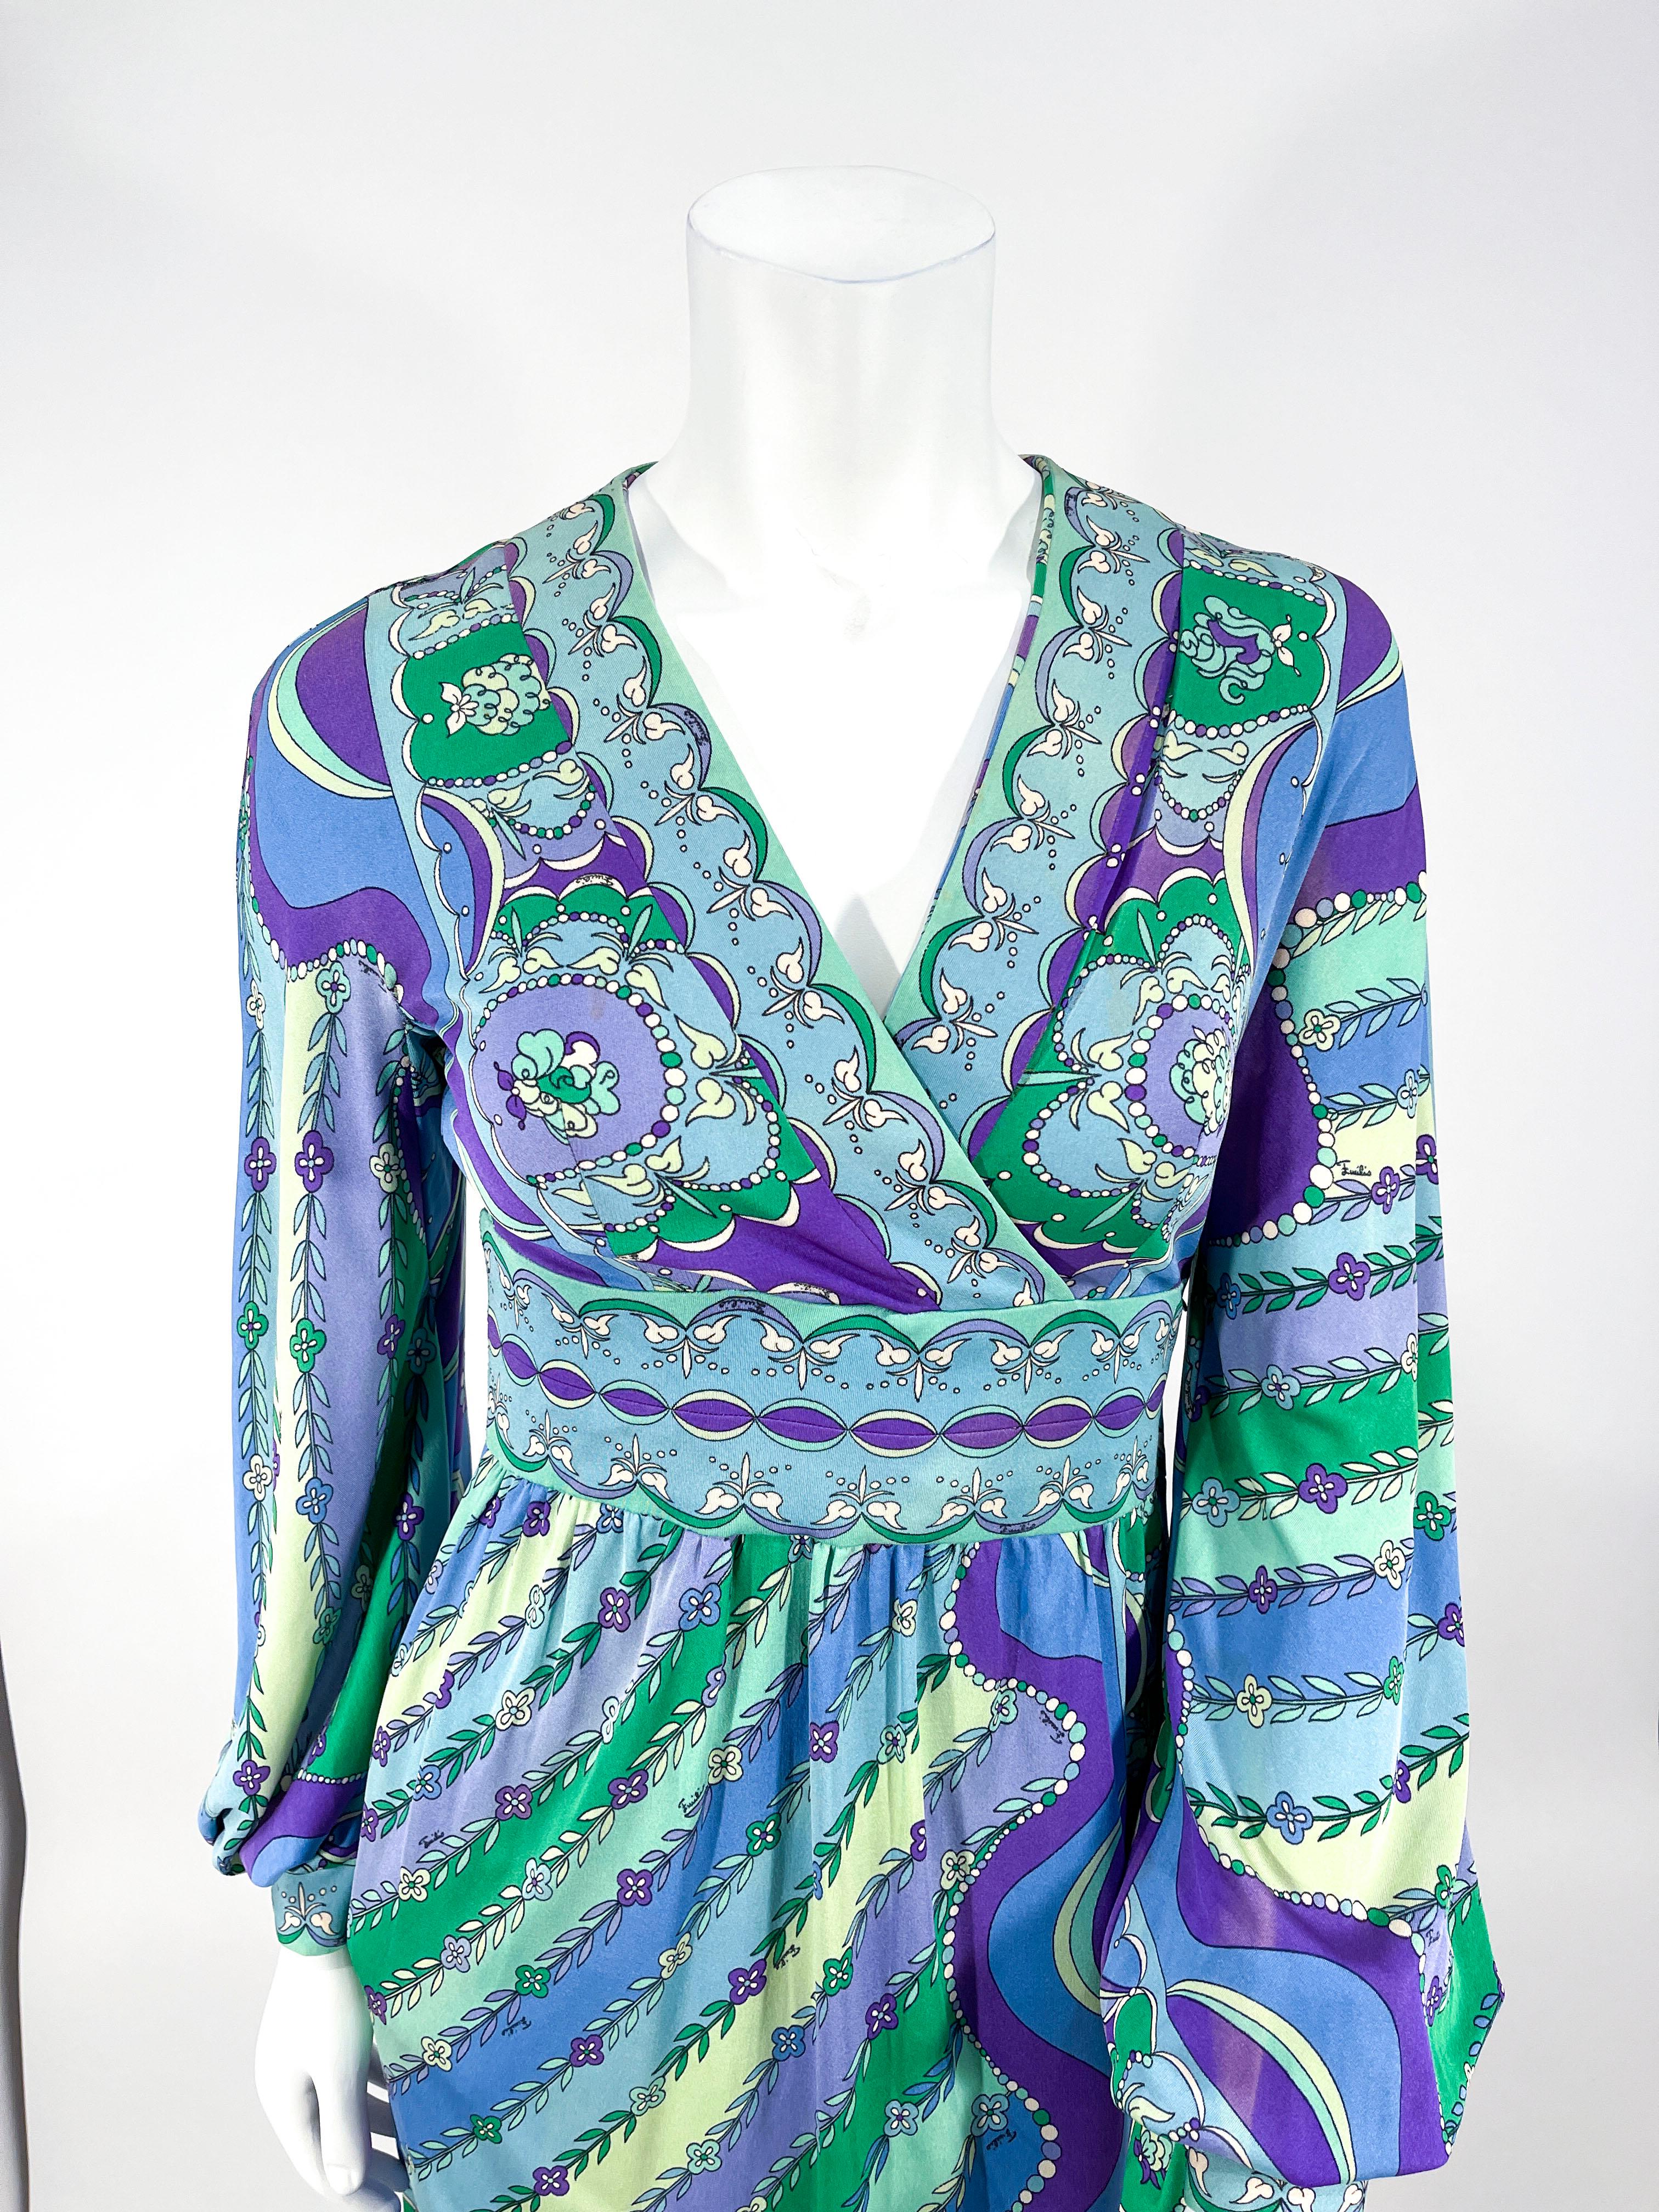 Late 1960s Emilio Pucci Psychedelic printed silk jersey knit dress in jewel tones of blue, teal, purple, green, and white. There are matched boarder prints along the faux wrap bodice, neckline, cuffs and hem. The sleeves have a full bishop